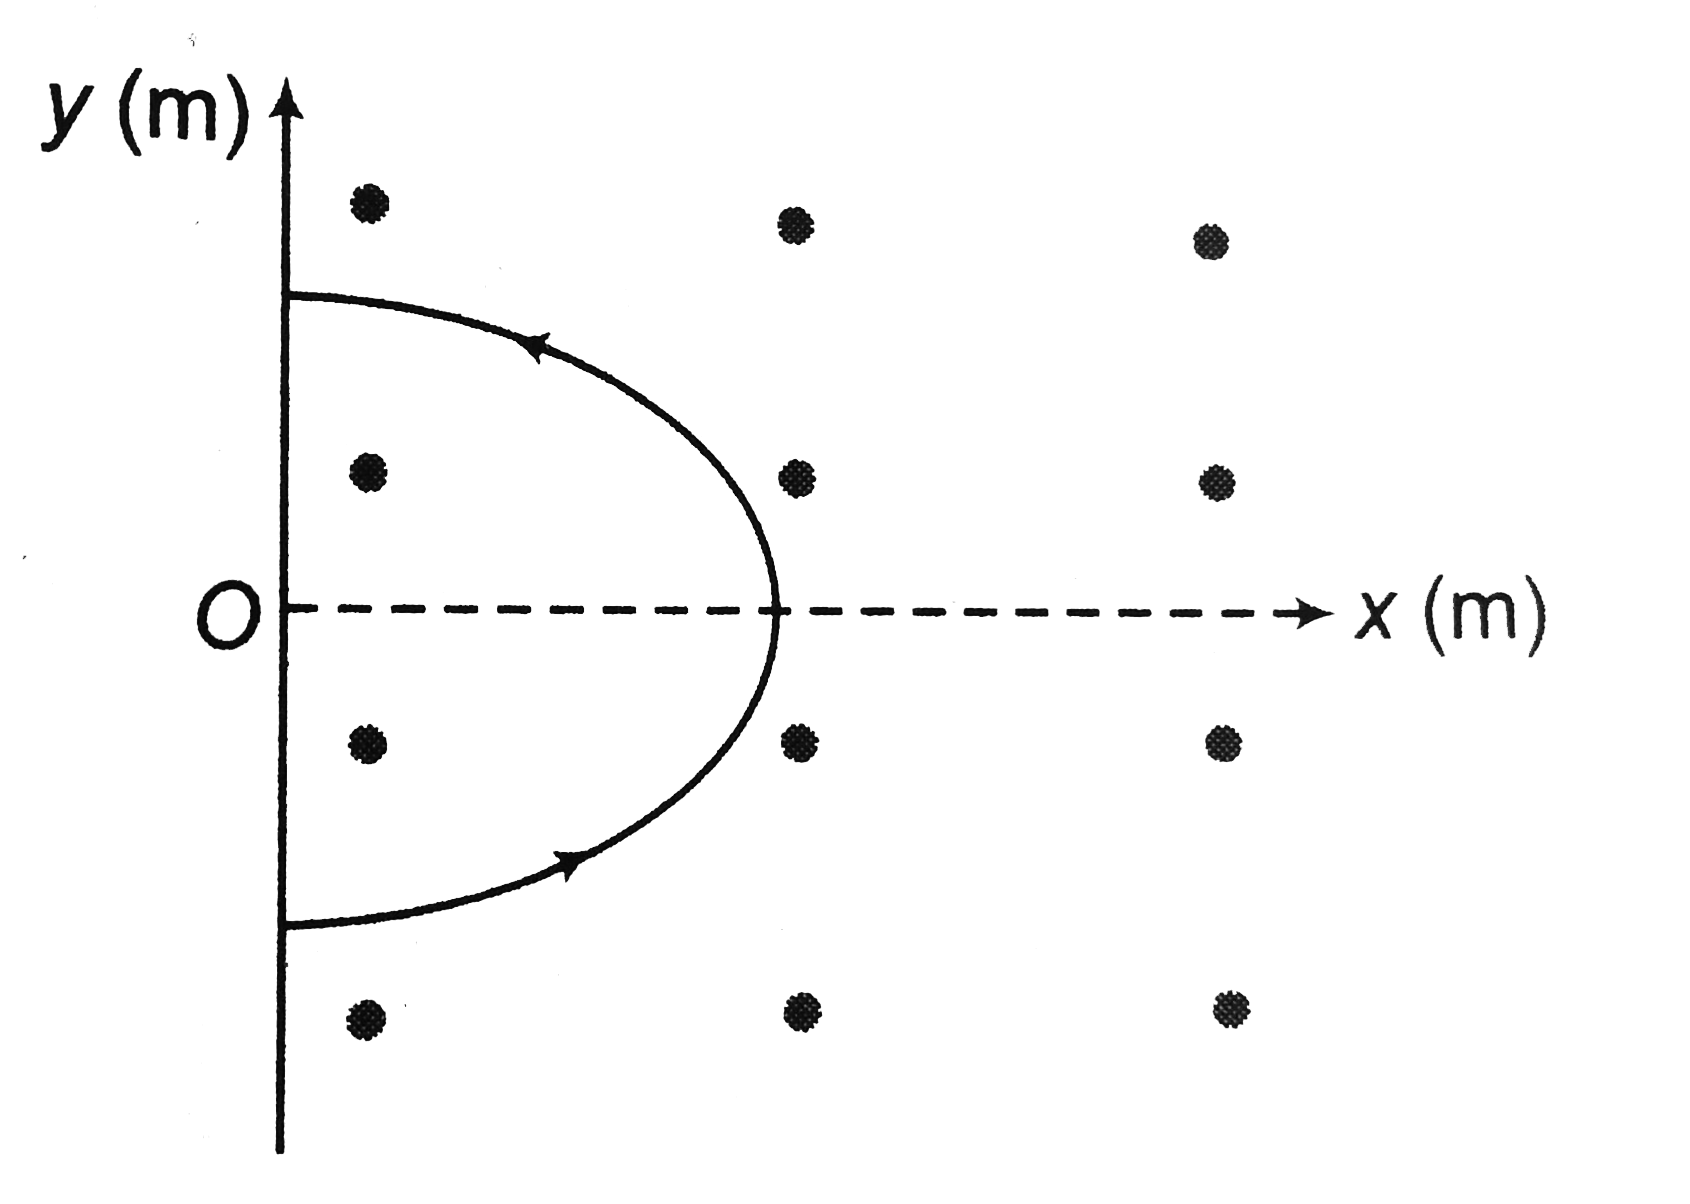 A wire carrying a current of 3A is bent in the form of a parabola y^2=4-x as shown in figure, where x and y are in metre. The wire is placed in a uniform magnetic field B=5hatk tesla. The force acting on the wire is